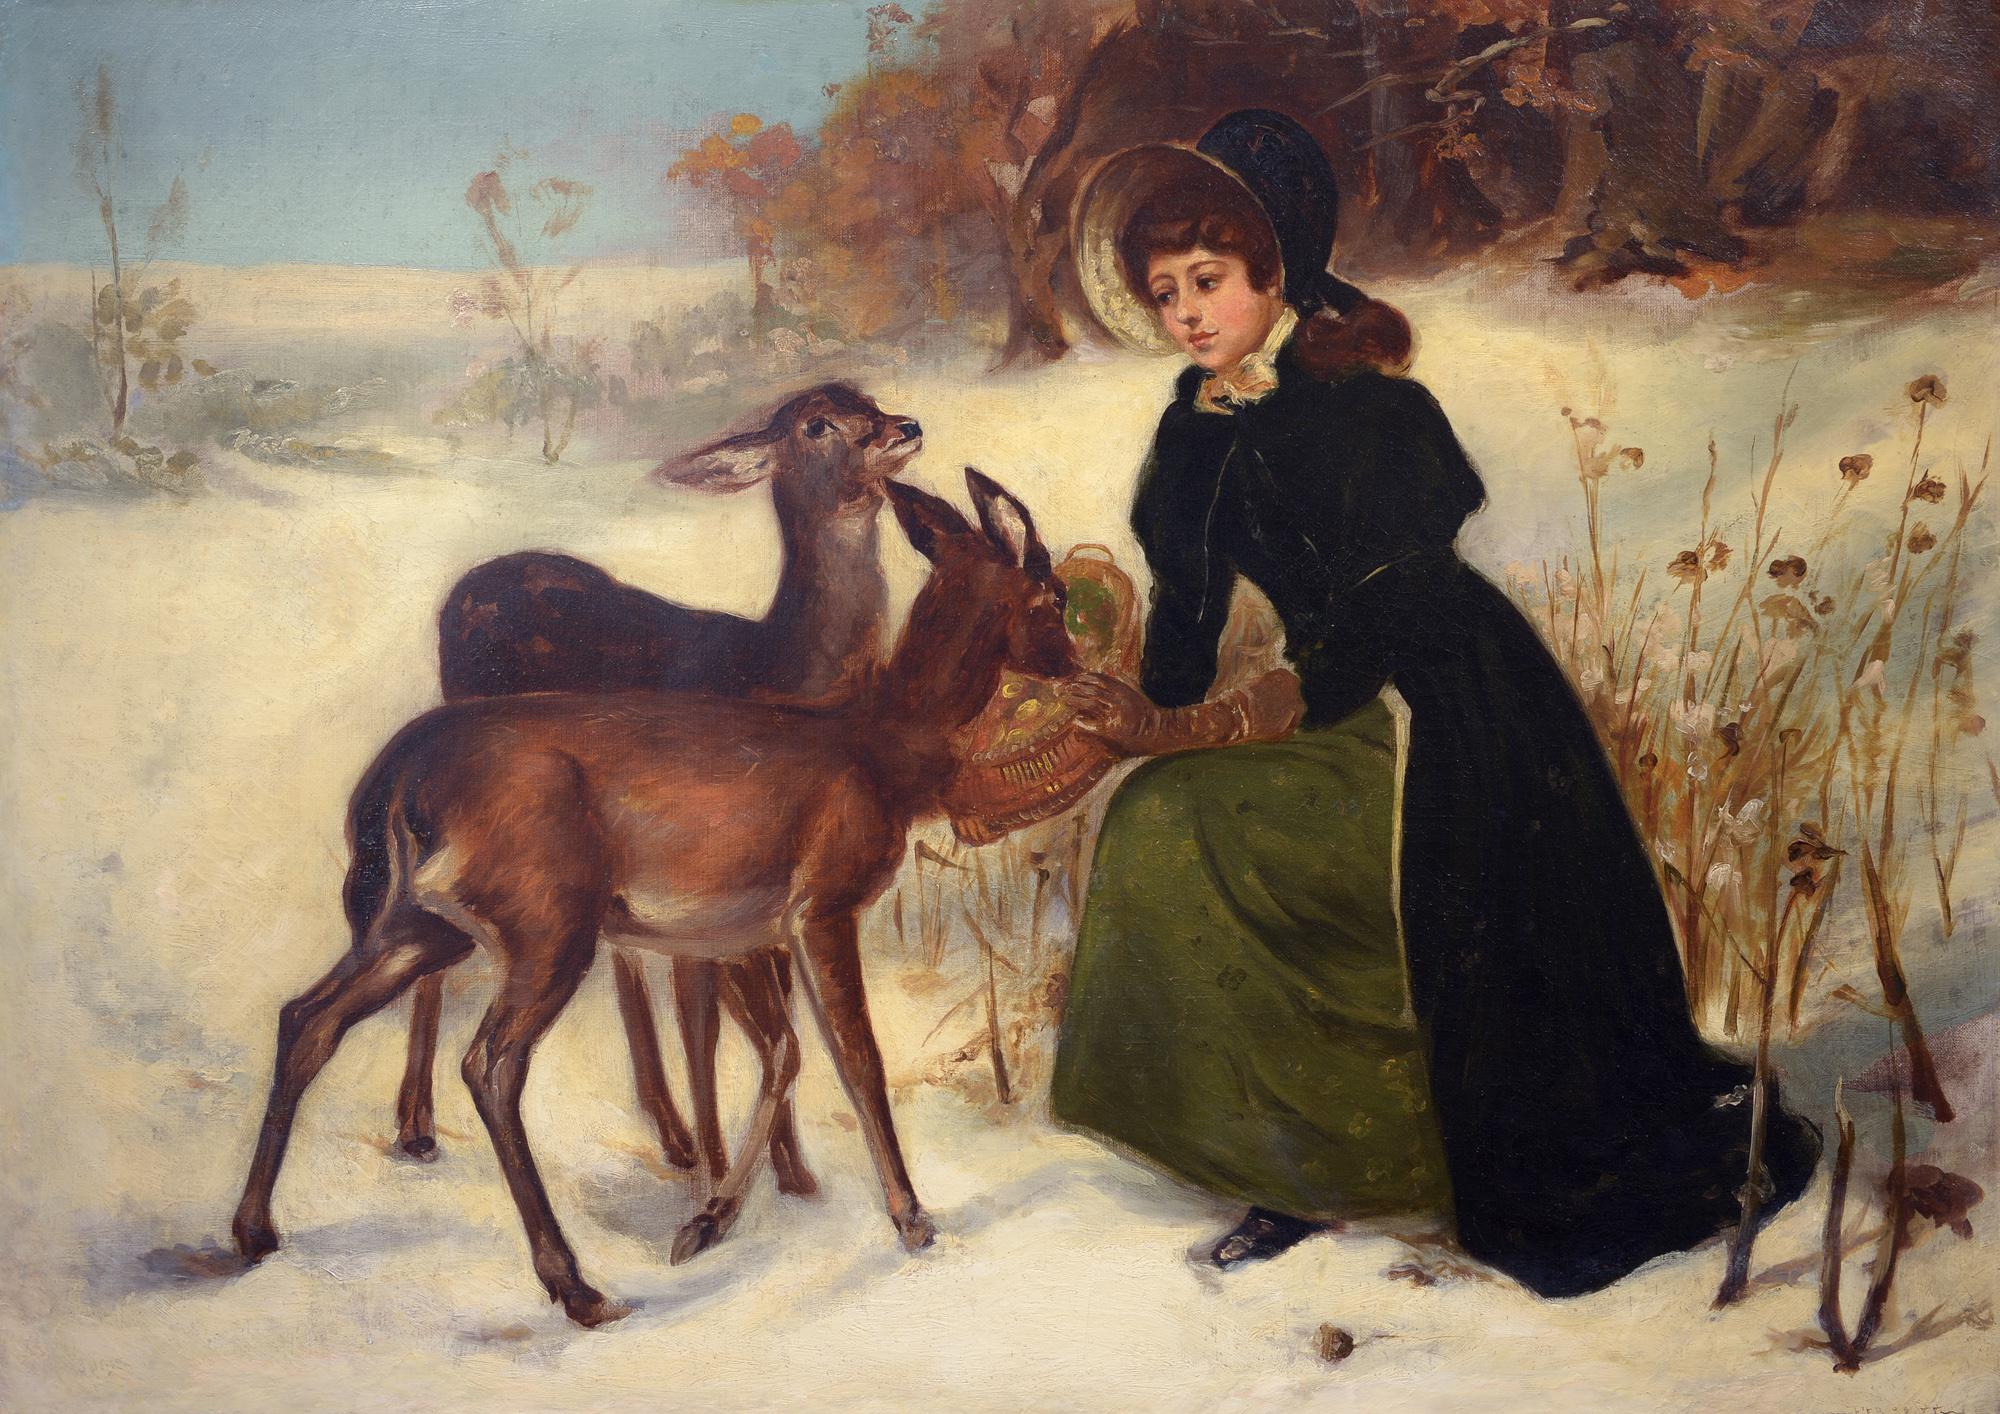 George Henry Boughton Figurative Painting - "Winter Deer, " American Realist, Landscape with Figure and Animals, MFA, Tate